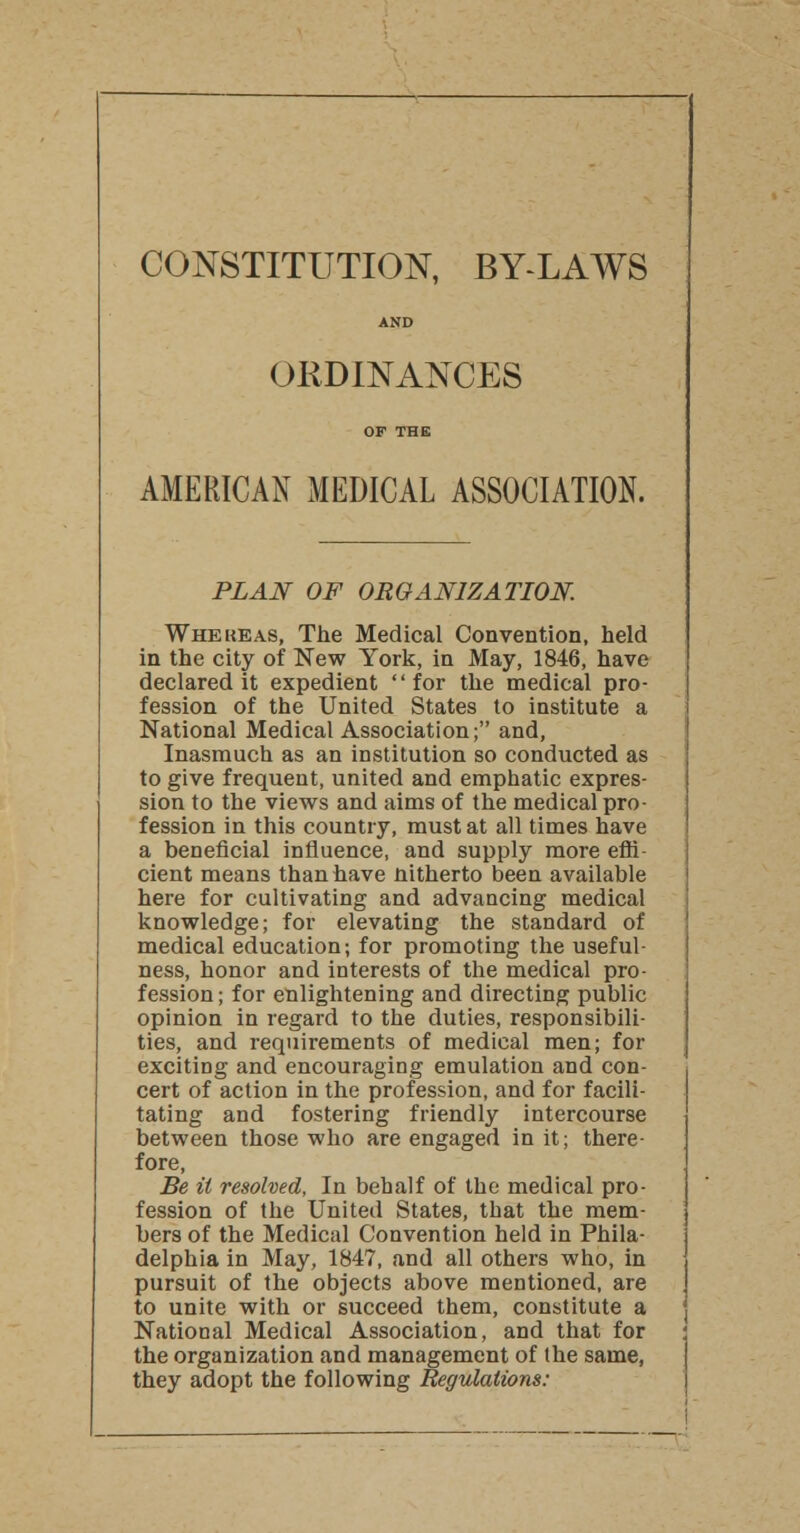 CONSTITUTION, BY-LAWS AND ORDINANCES OF THE AMERICAN MEDICAL ASSOCIATION. PLAN OF ORGANIZATION. Whekeas, The Medical Convention, held in the city of New York, in May, 1846, have declared it expedient for the medical pro- fession of the United States to institute a National Medical Association; and, Inasmuch as an institution so conducted as to give frequent, united and emphatic expres- sion to the views and aims of the medical pro- fession in this country, must at all times have a beneficial influence, and supply more effi- cient means than have nitherto been available here for cultivating and advancing medical knowledge; for elevating the standard of medical education; for promoting the useful- ness, honor and interests of the medical pro- fession ; for enlightening and directing public opinion in regard to the duties, responsibili- ties, and requirements of medical men; for exciting and encouraging emulation and con- cert of action in the profession, and for facili- tating and fostering friendly intercourse between those who are engaged in it; there- fore, Be it resolved, In behalf of the medical pro- fession of the United States, that the mem- bers of the Medical Convention held in Phila- delphia in May, 1847, and all others who, in pursuit of the objects above mentioned, are to unite with or succeed them, constitute a National Medical Association, and that for the organization and management of the same, they adopt the following Regulations: